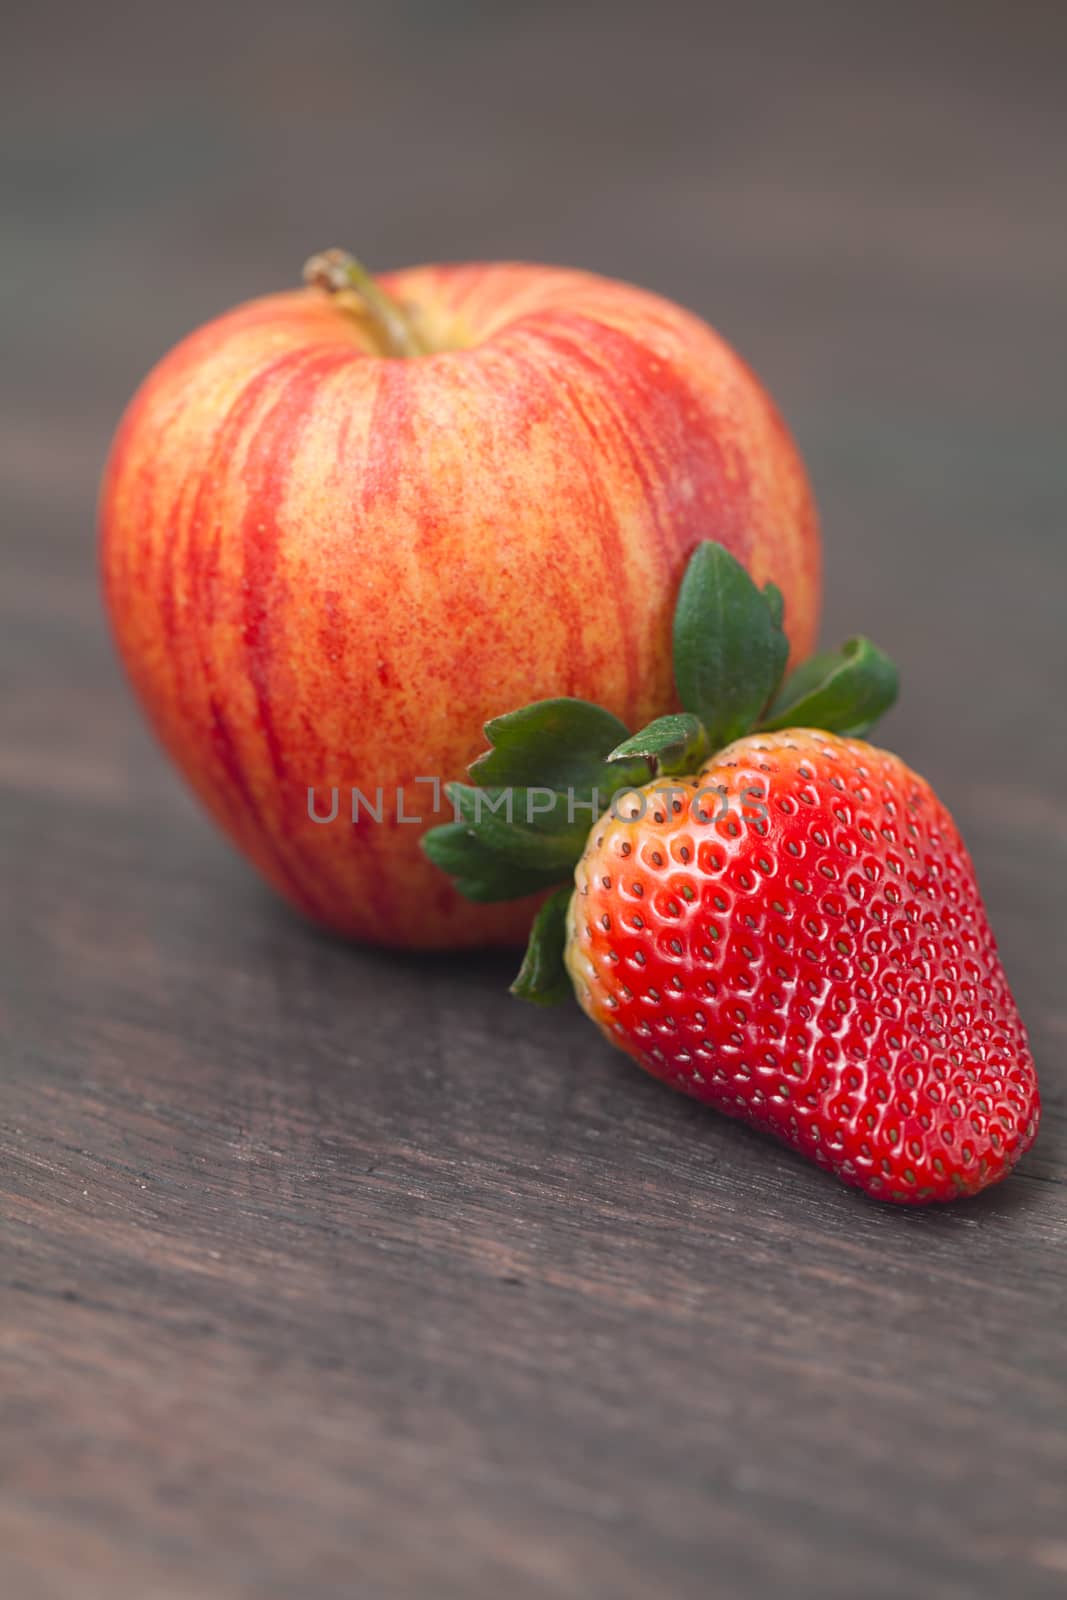  juicy apple and strawberry on a wooden surface by jannyjus